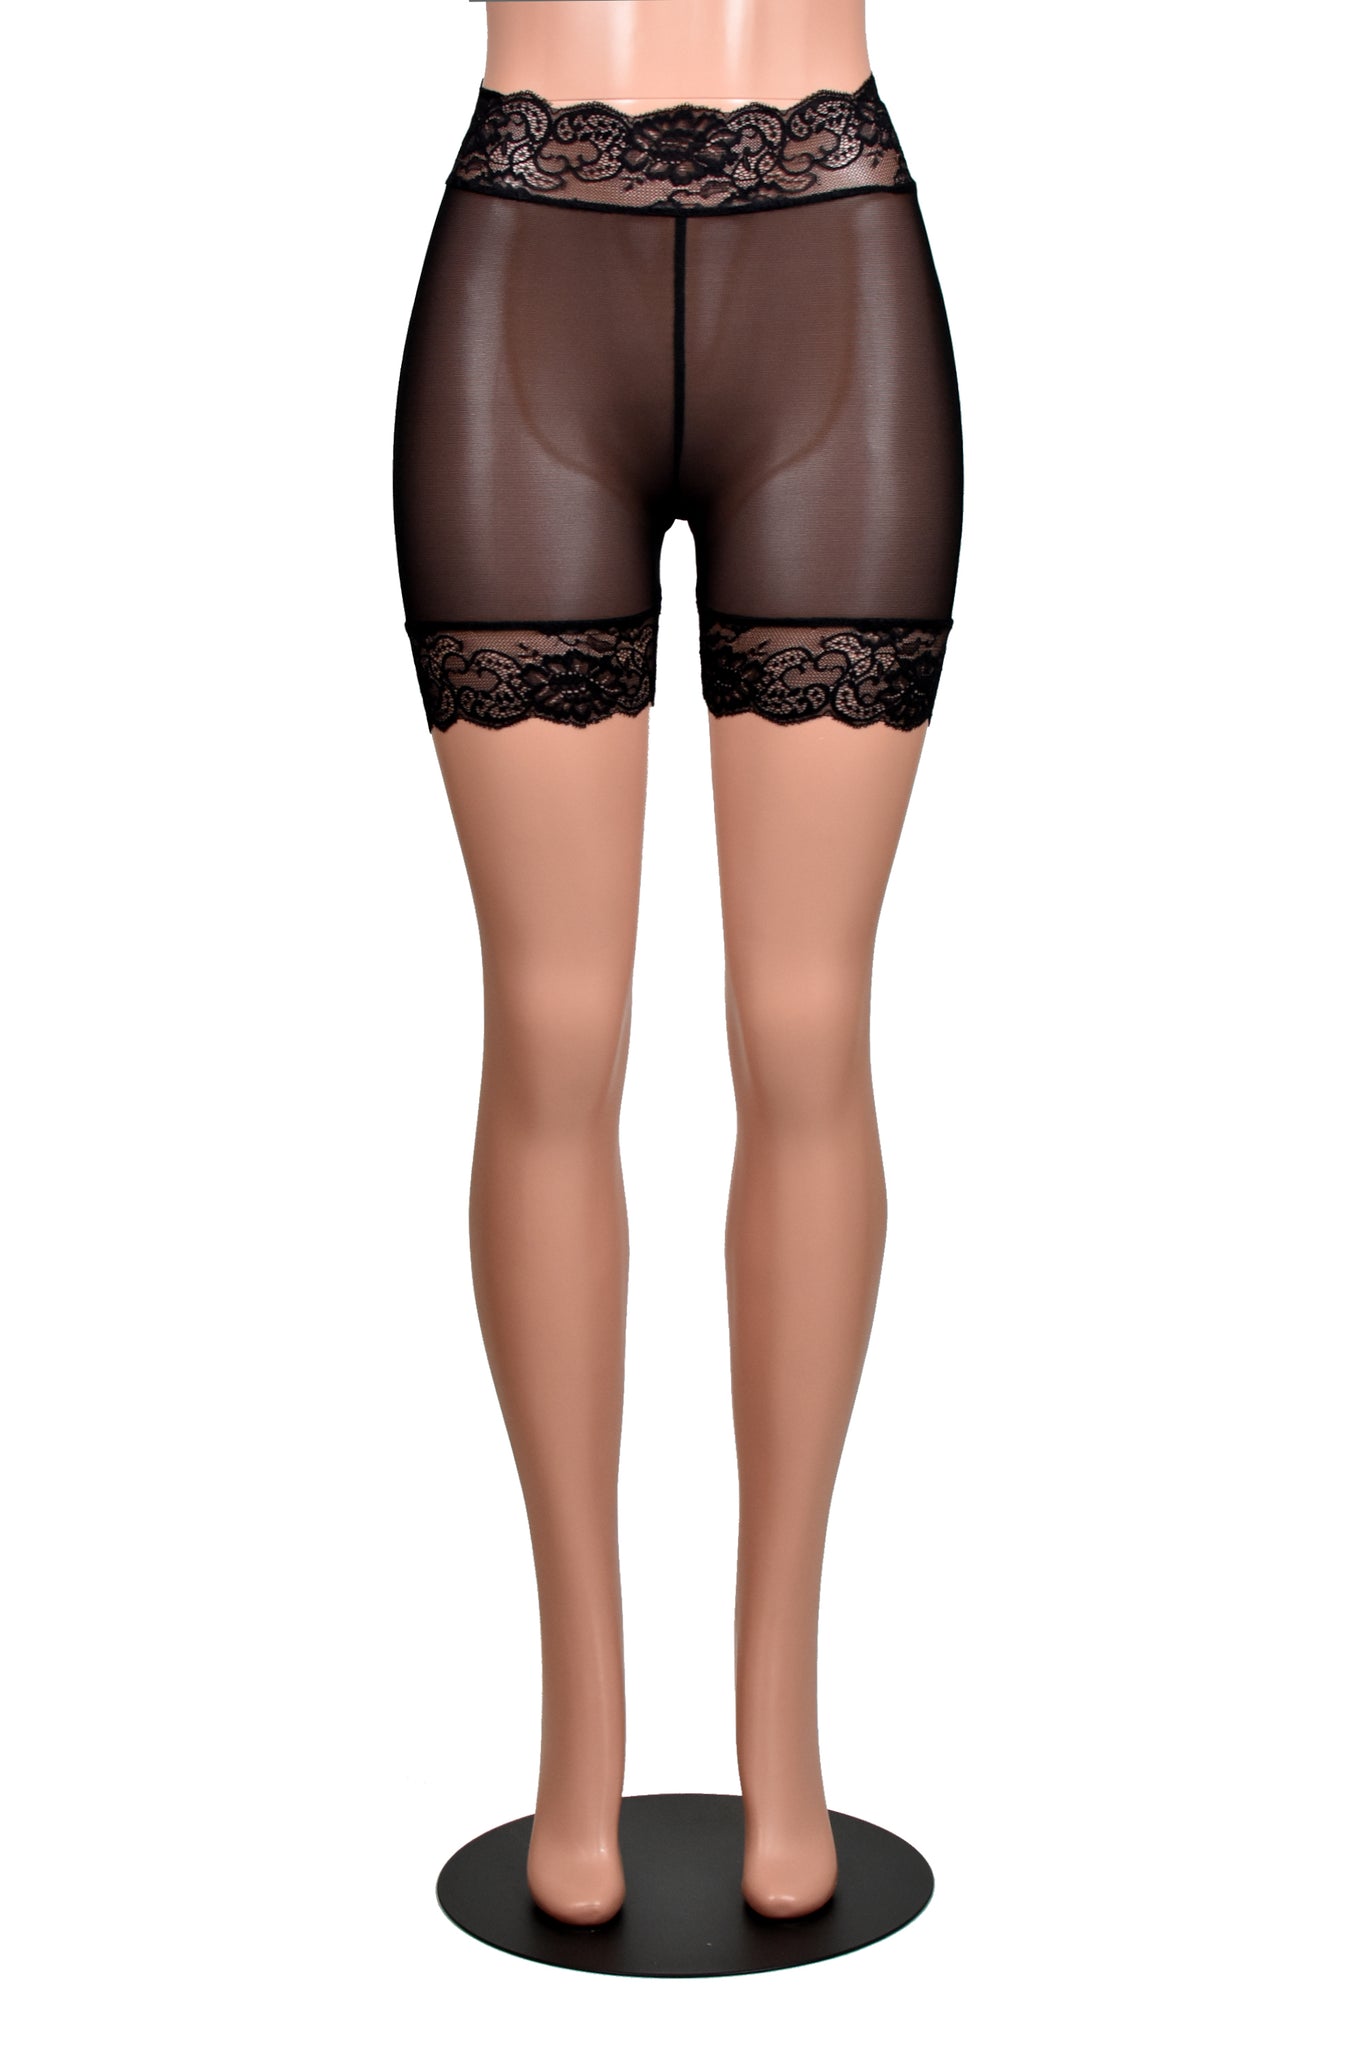 High-Waisted Sheer Black Mesh Stretch Lace Shorts (5" inseam)